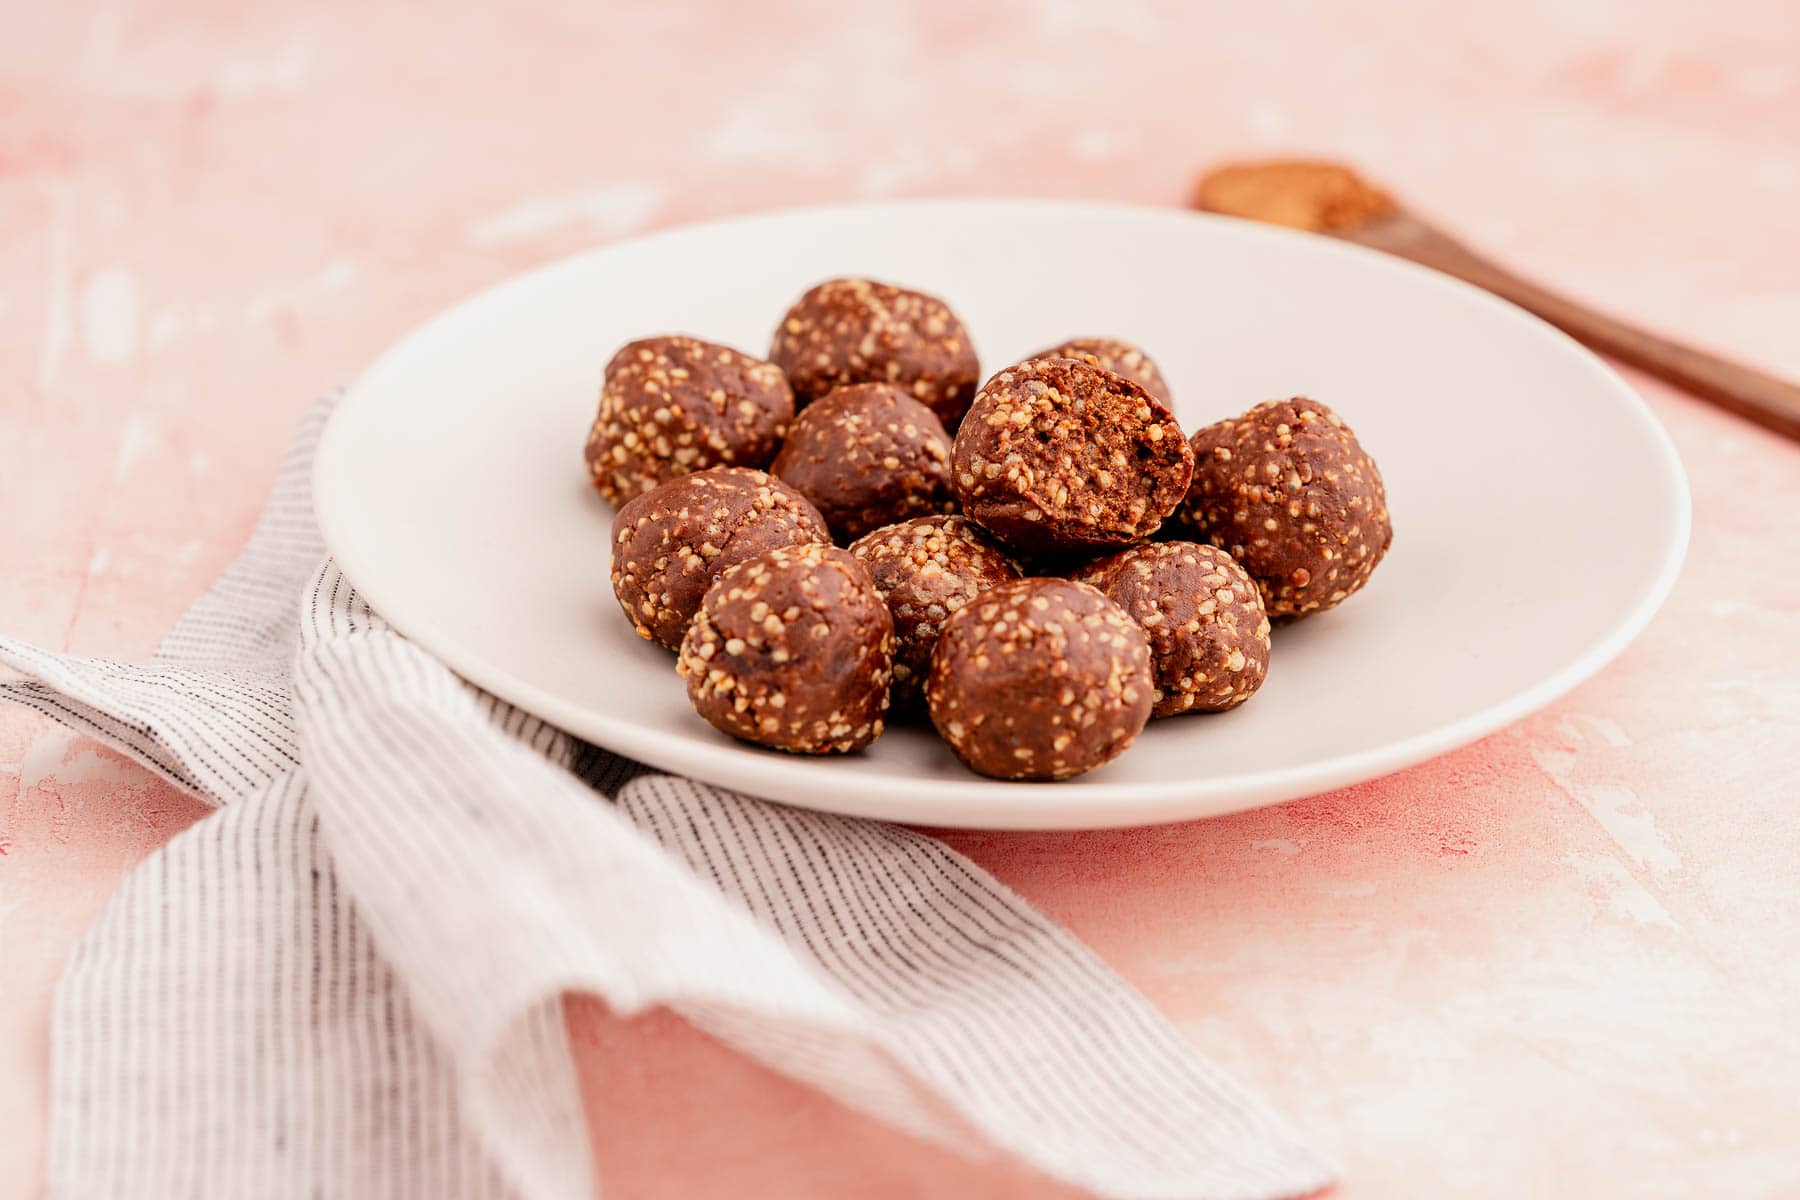 A white plate with chocolate quinoa crunch bites on a pink surface next to a wooden spoon.